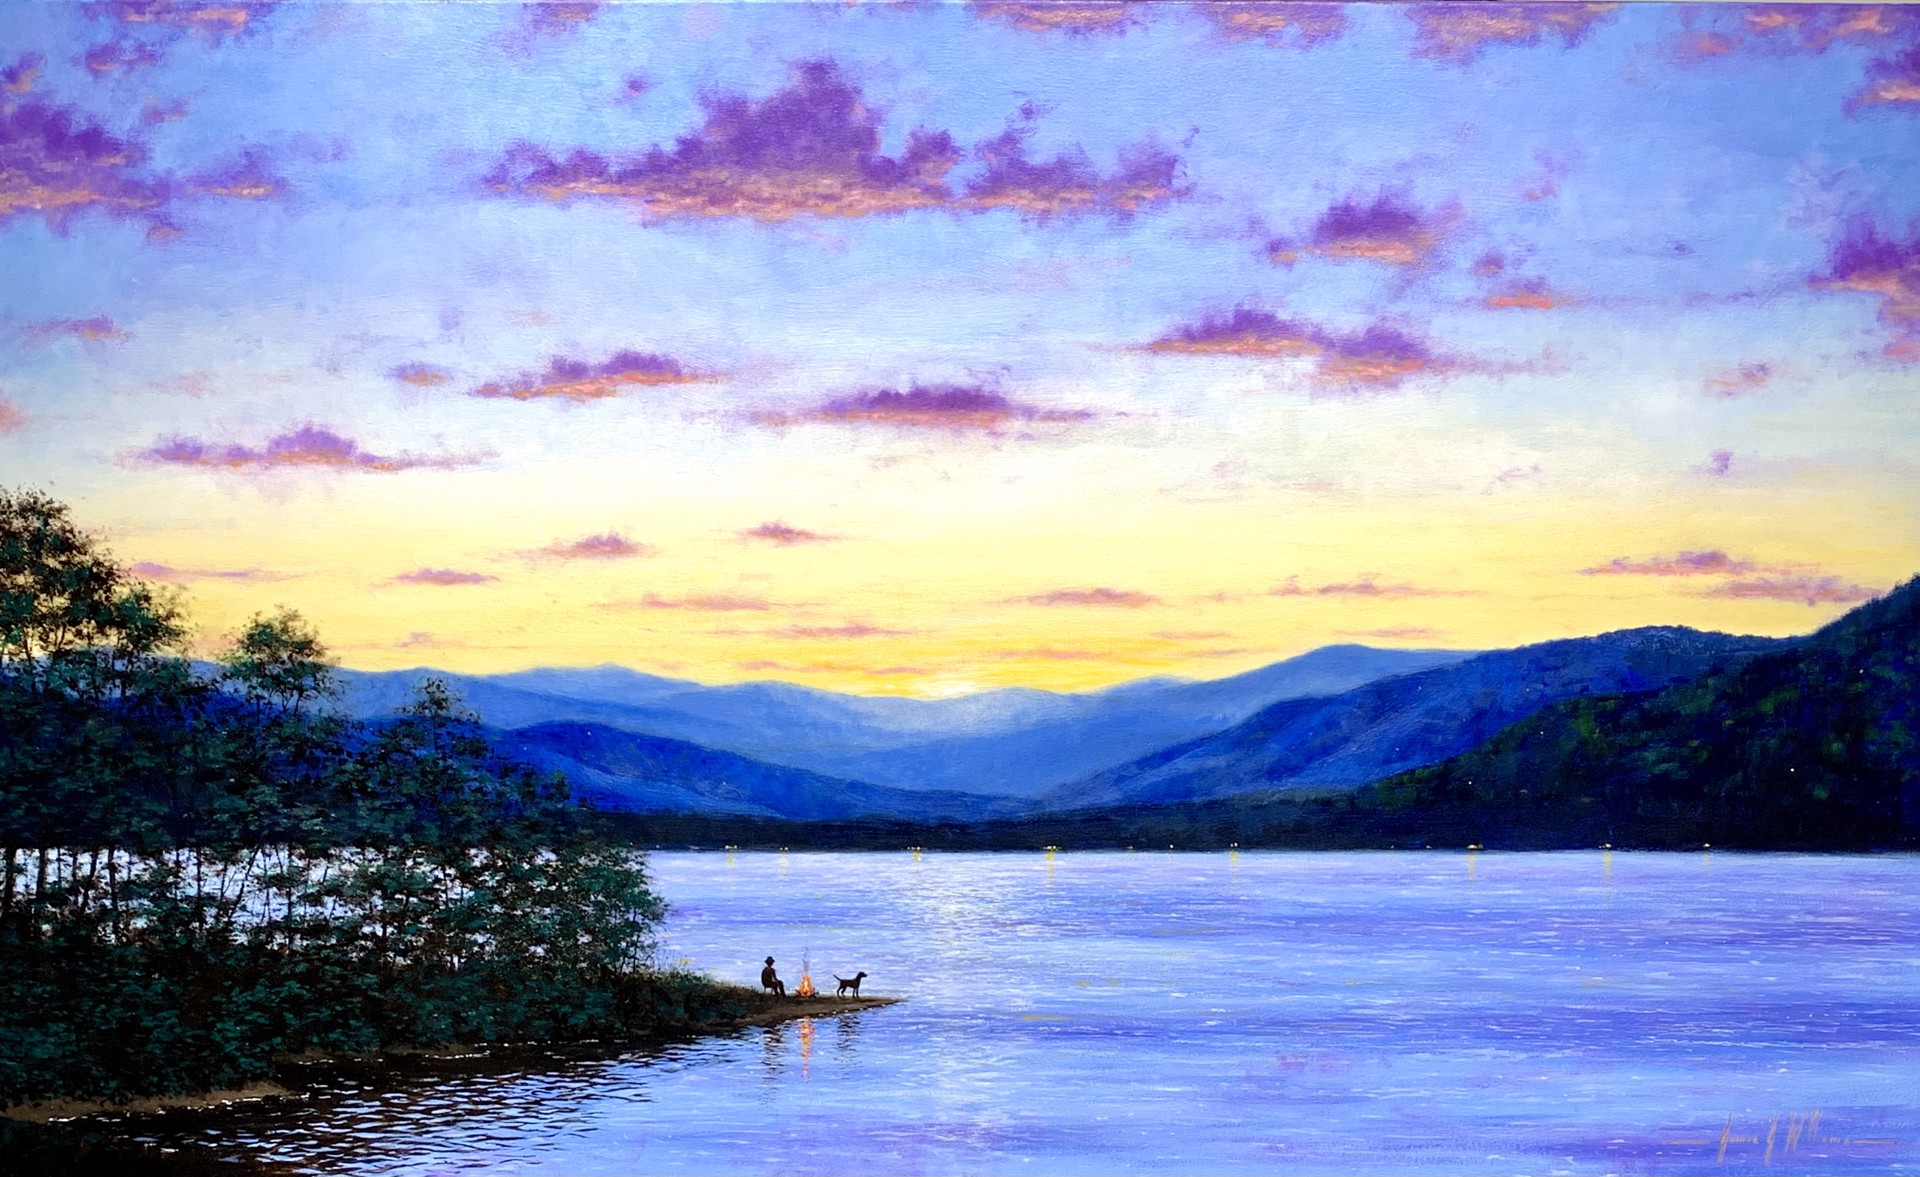 Sunset On The Lake by James J. Williams